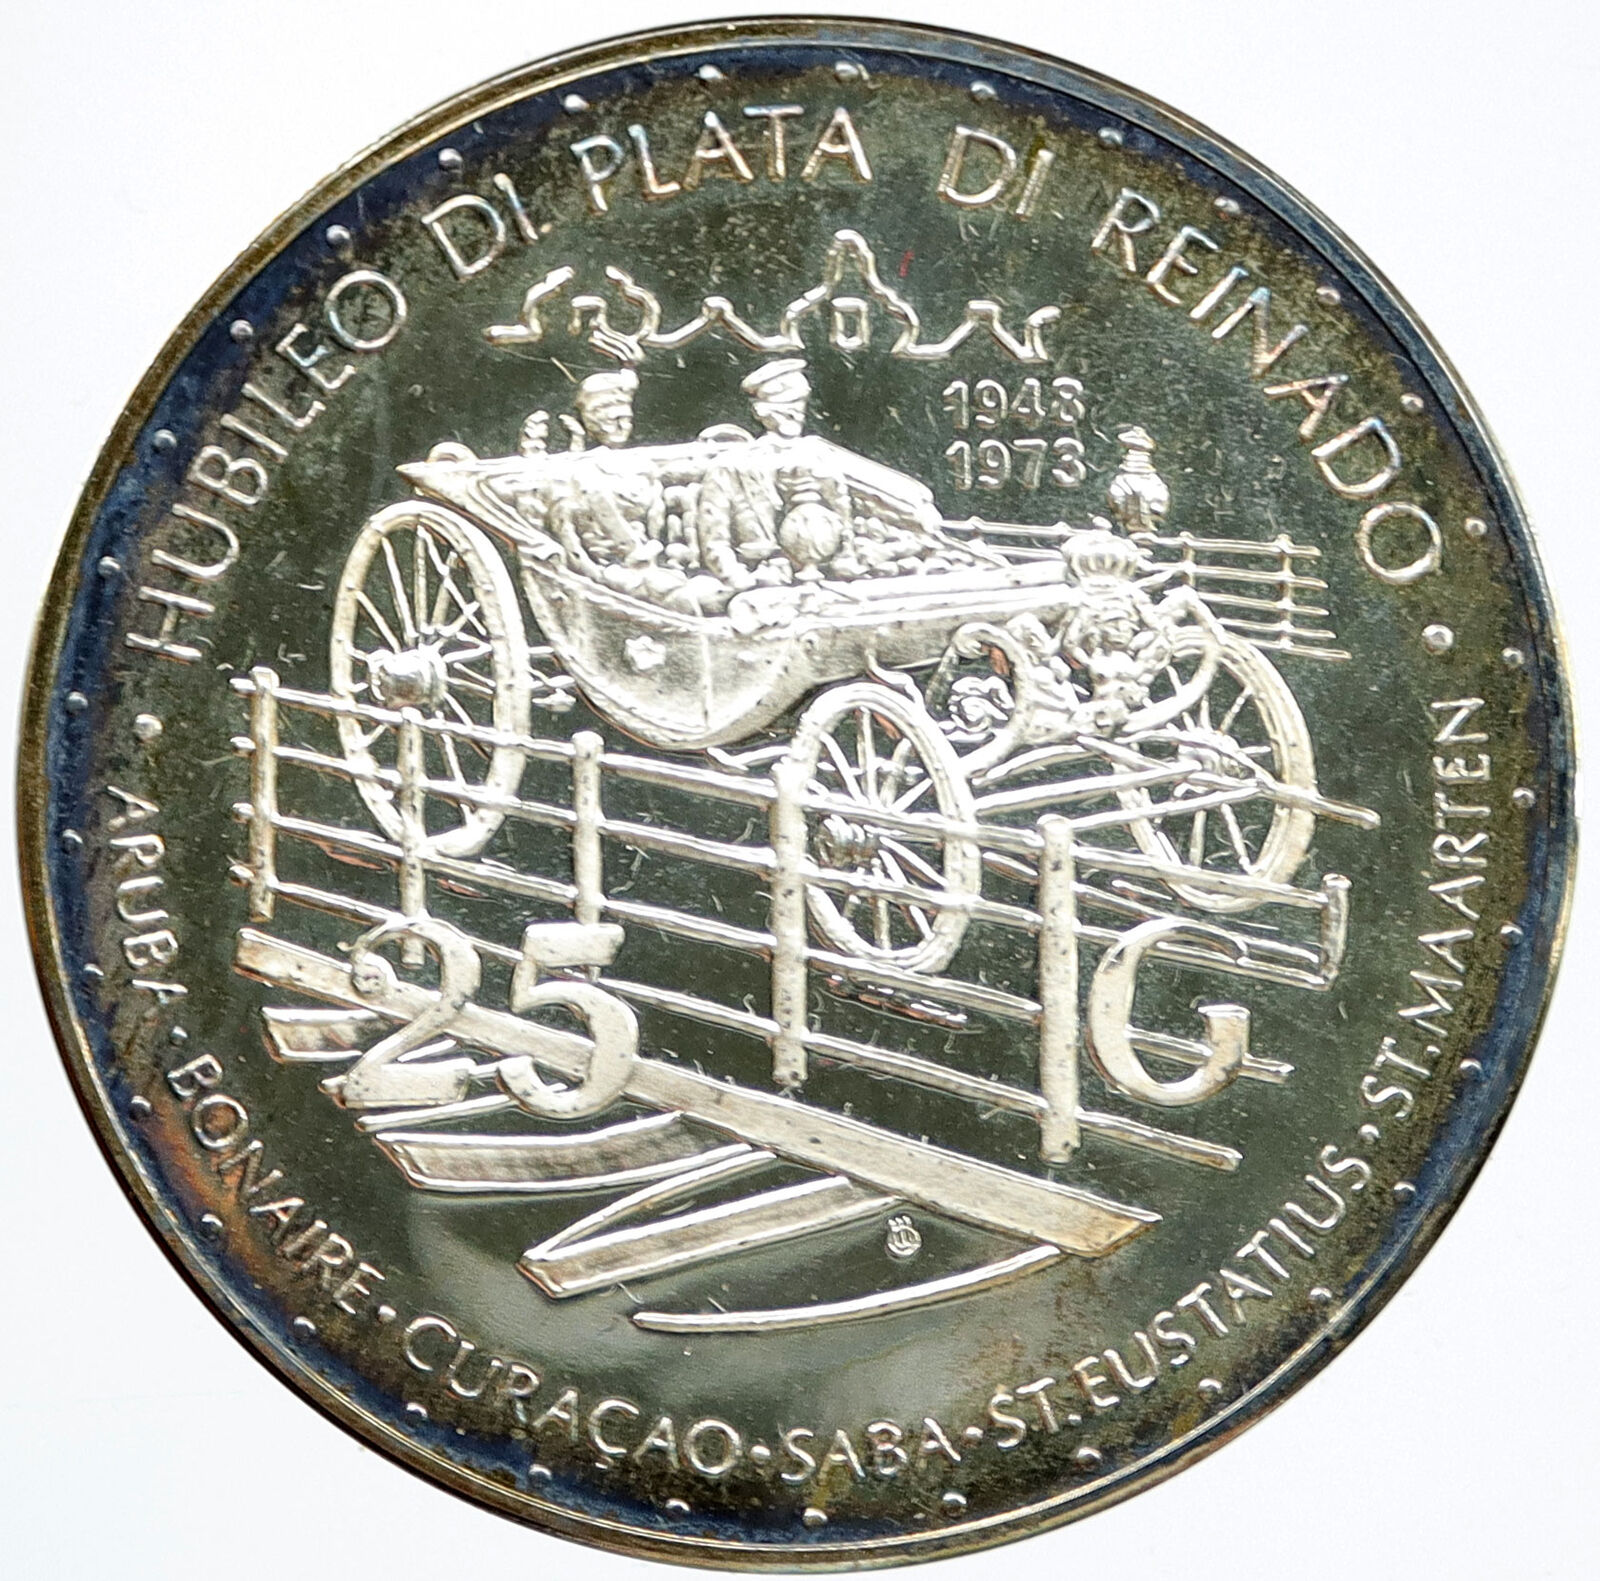 1973 NETHERLANDS ANTILLES Juliana Horse CARRIAGE Proof Silver 25 G Coin i117456